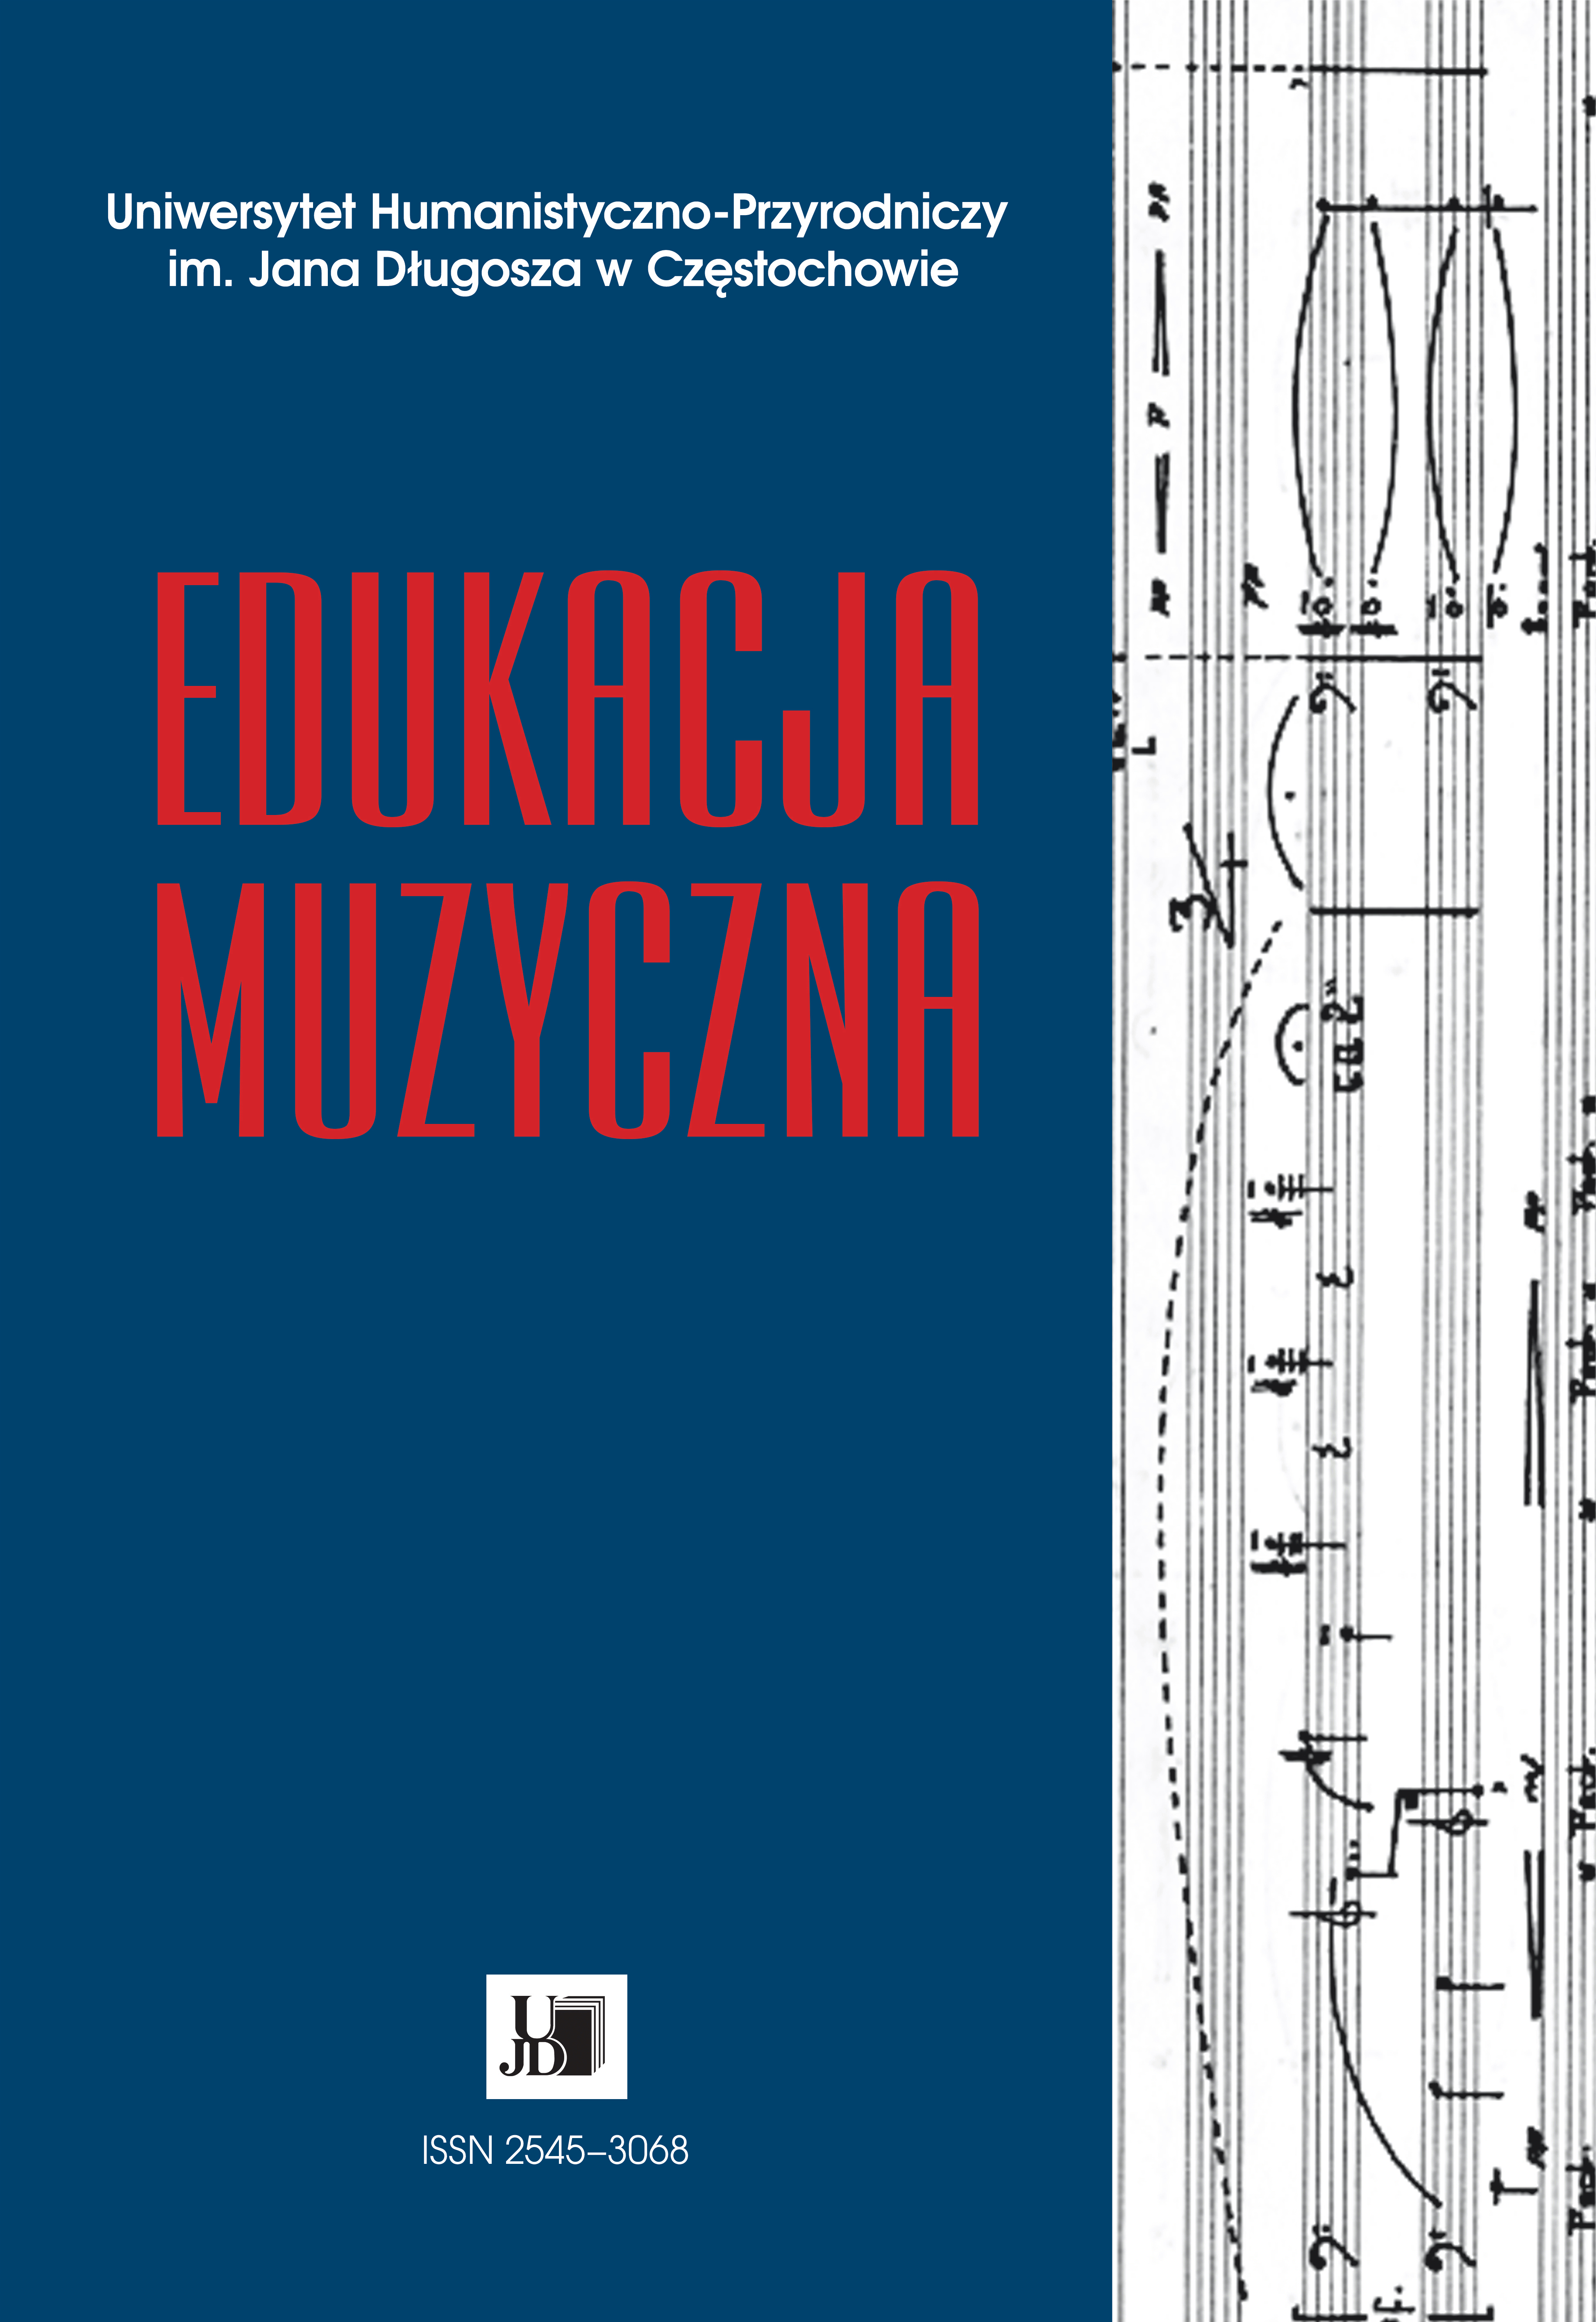 Cover of the magazine "Music Education"